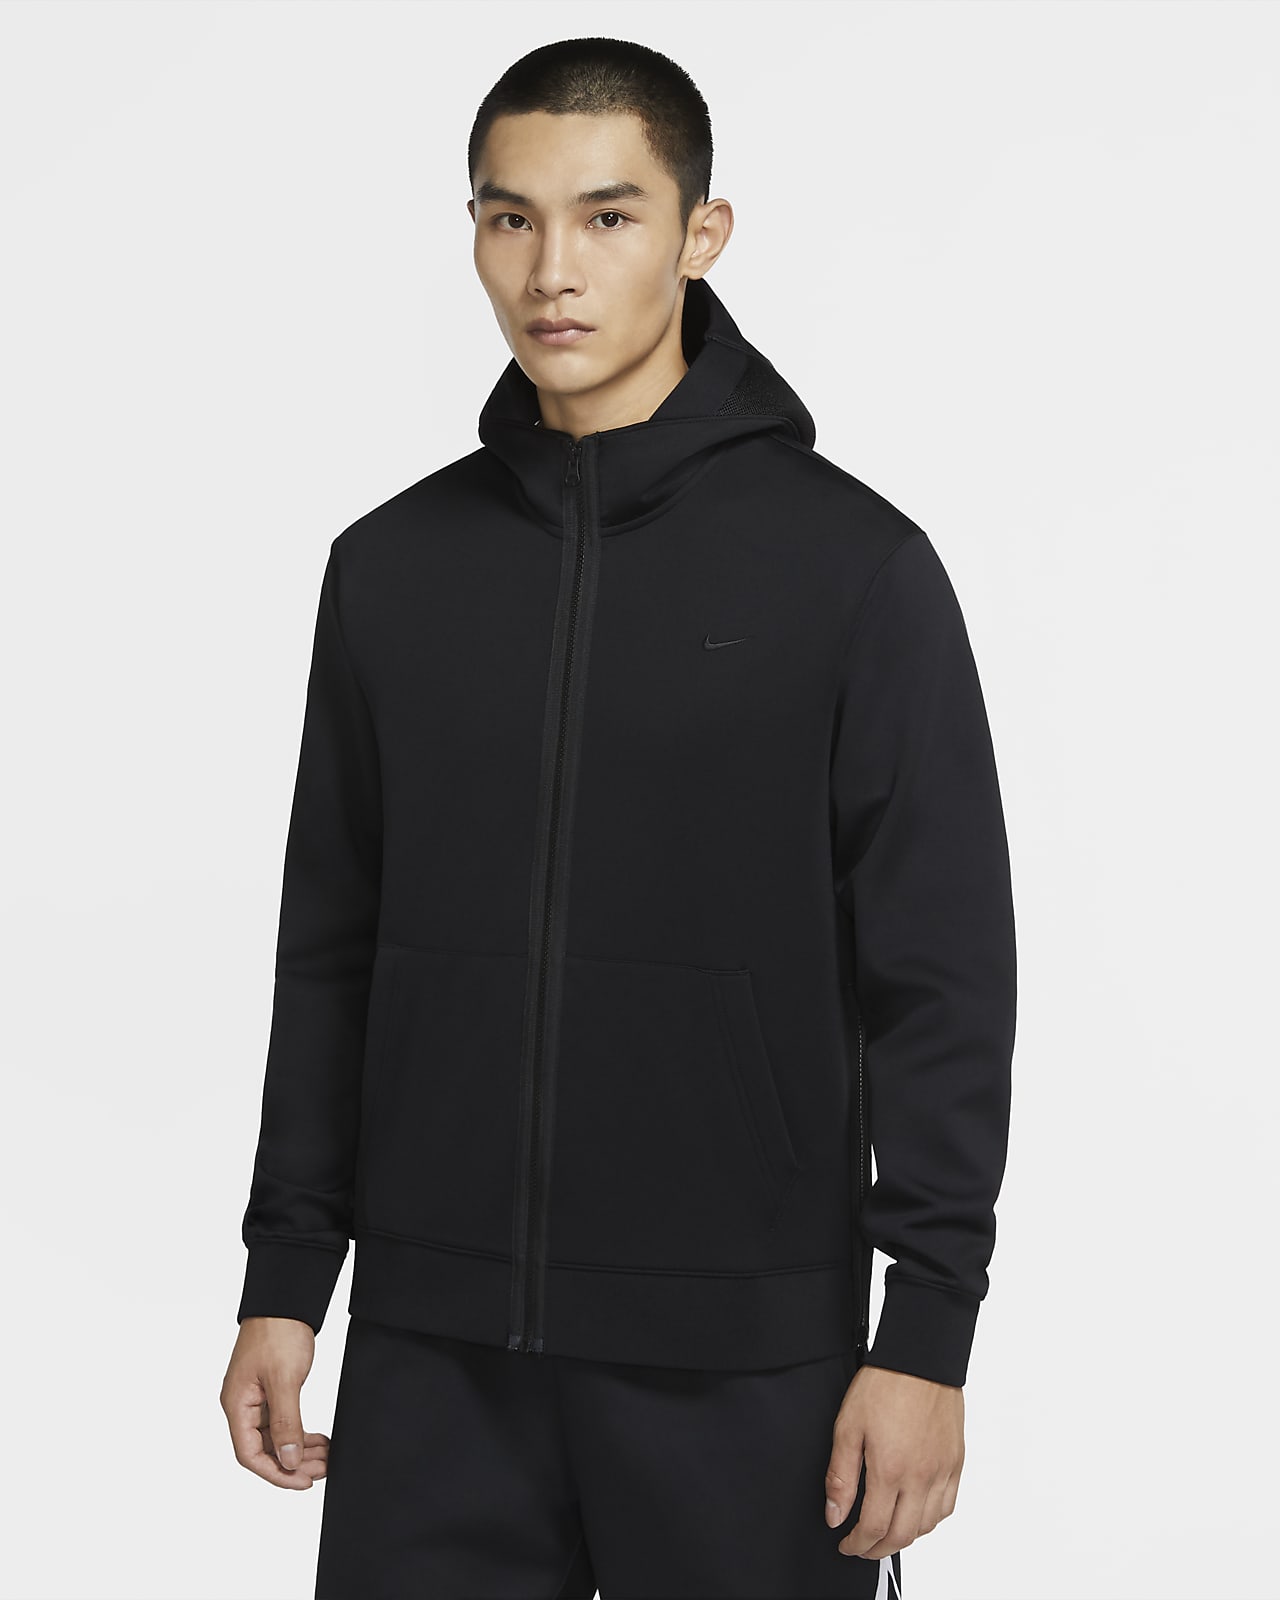 therma flex showtime hoodie